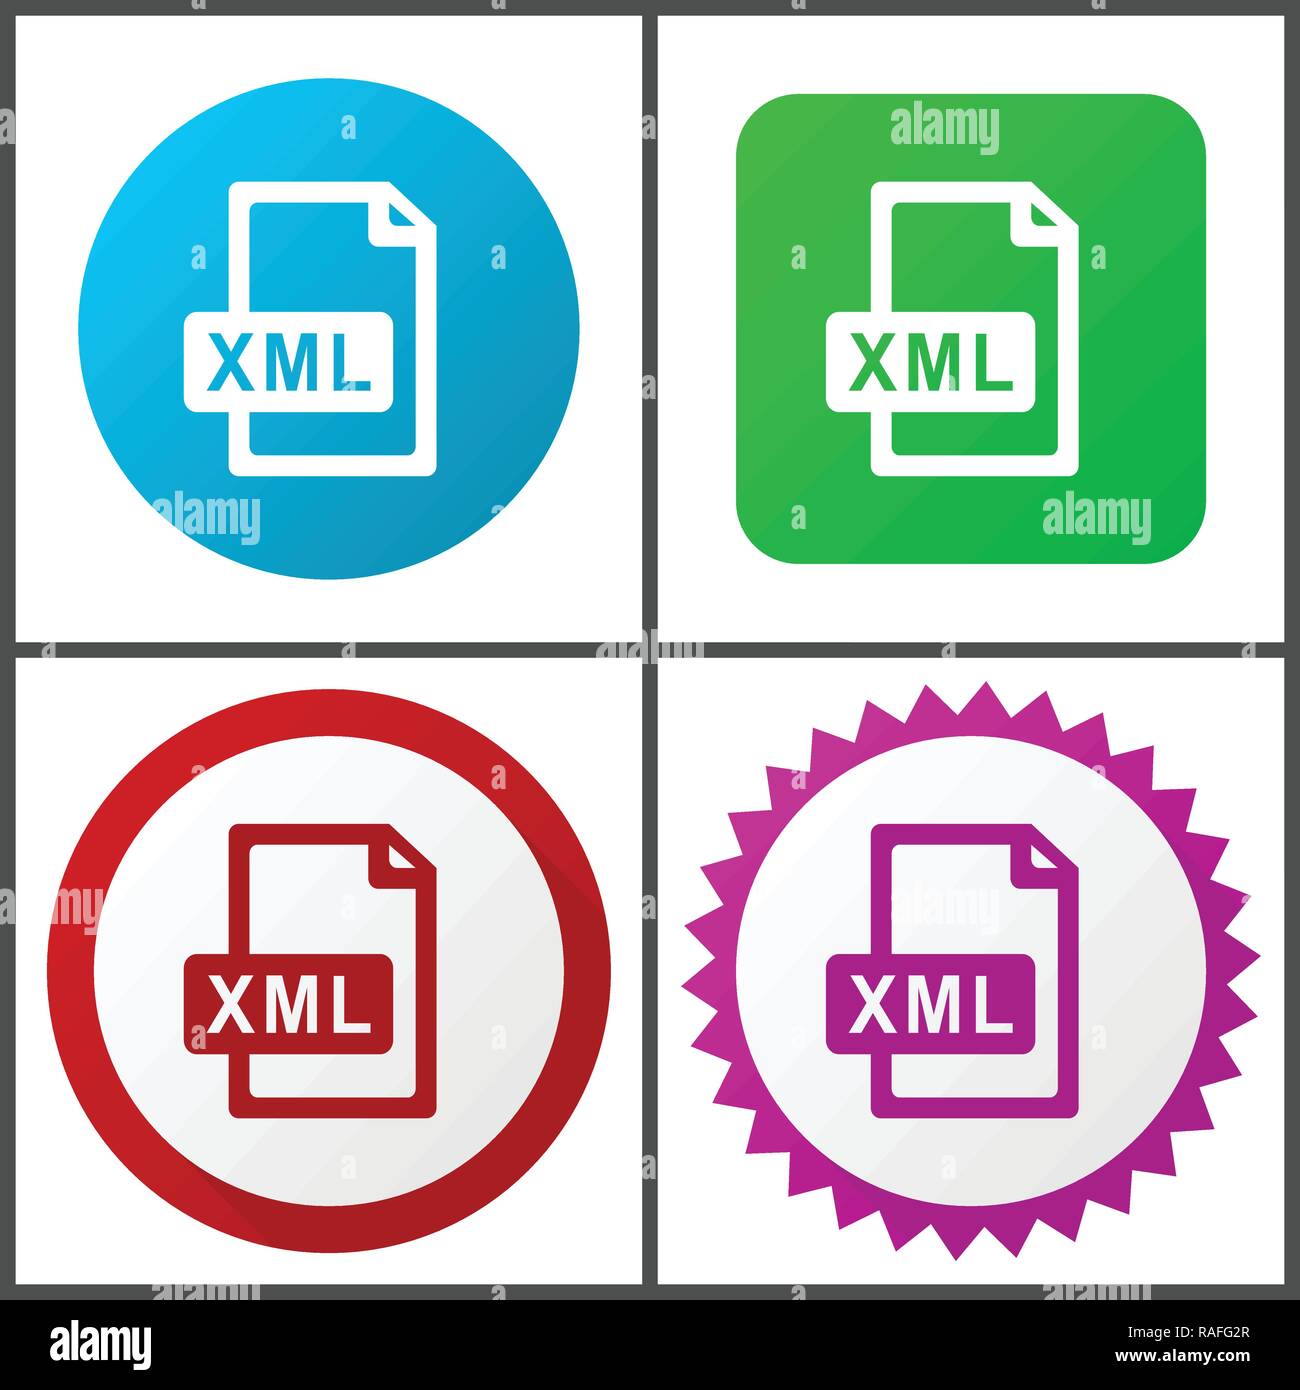 Xml file vector icon set. Flat design web icons in eps 10. Colorful internet buttons in four versions. Stock Vector